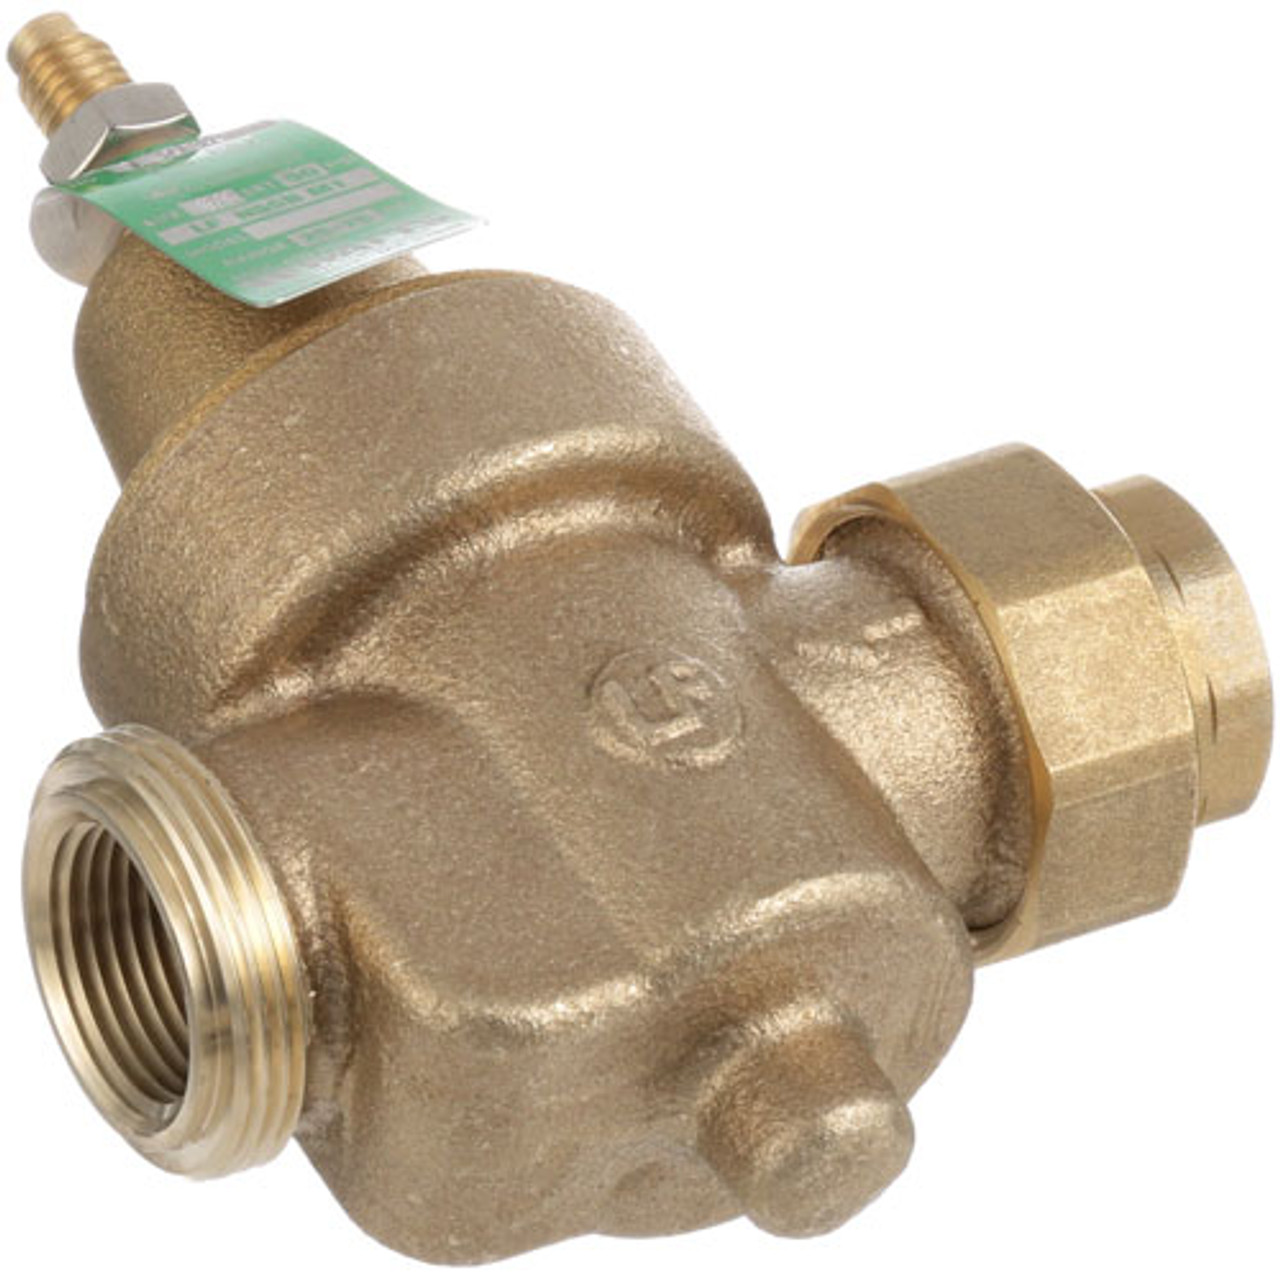 Valve, Pressure Reducing - Replacement Part For Hatco HT03-02-015